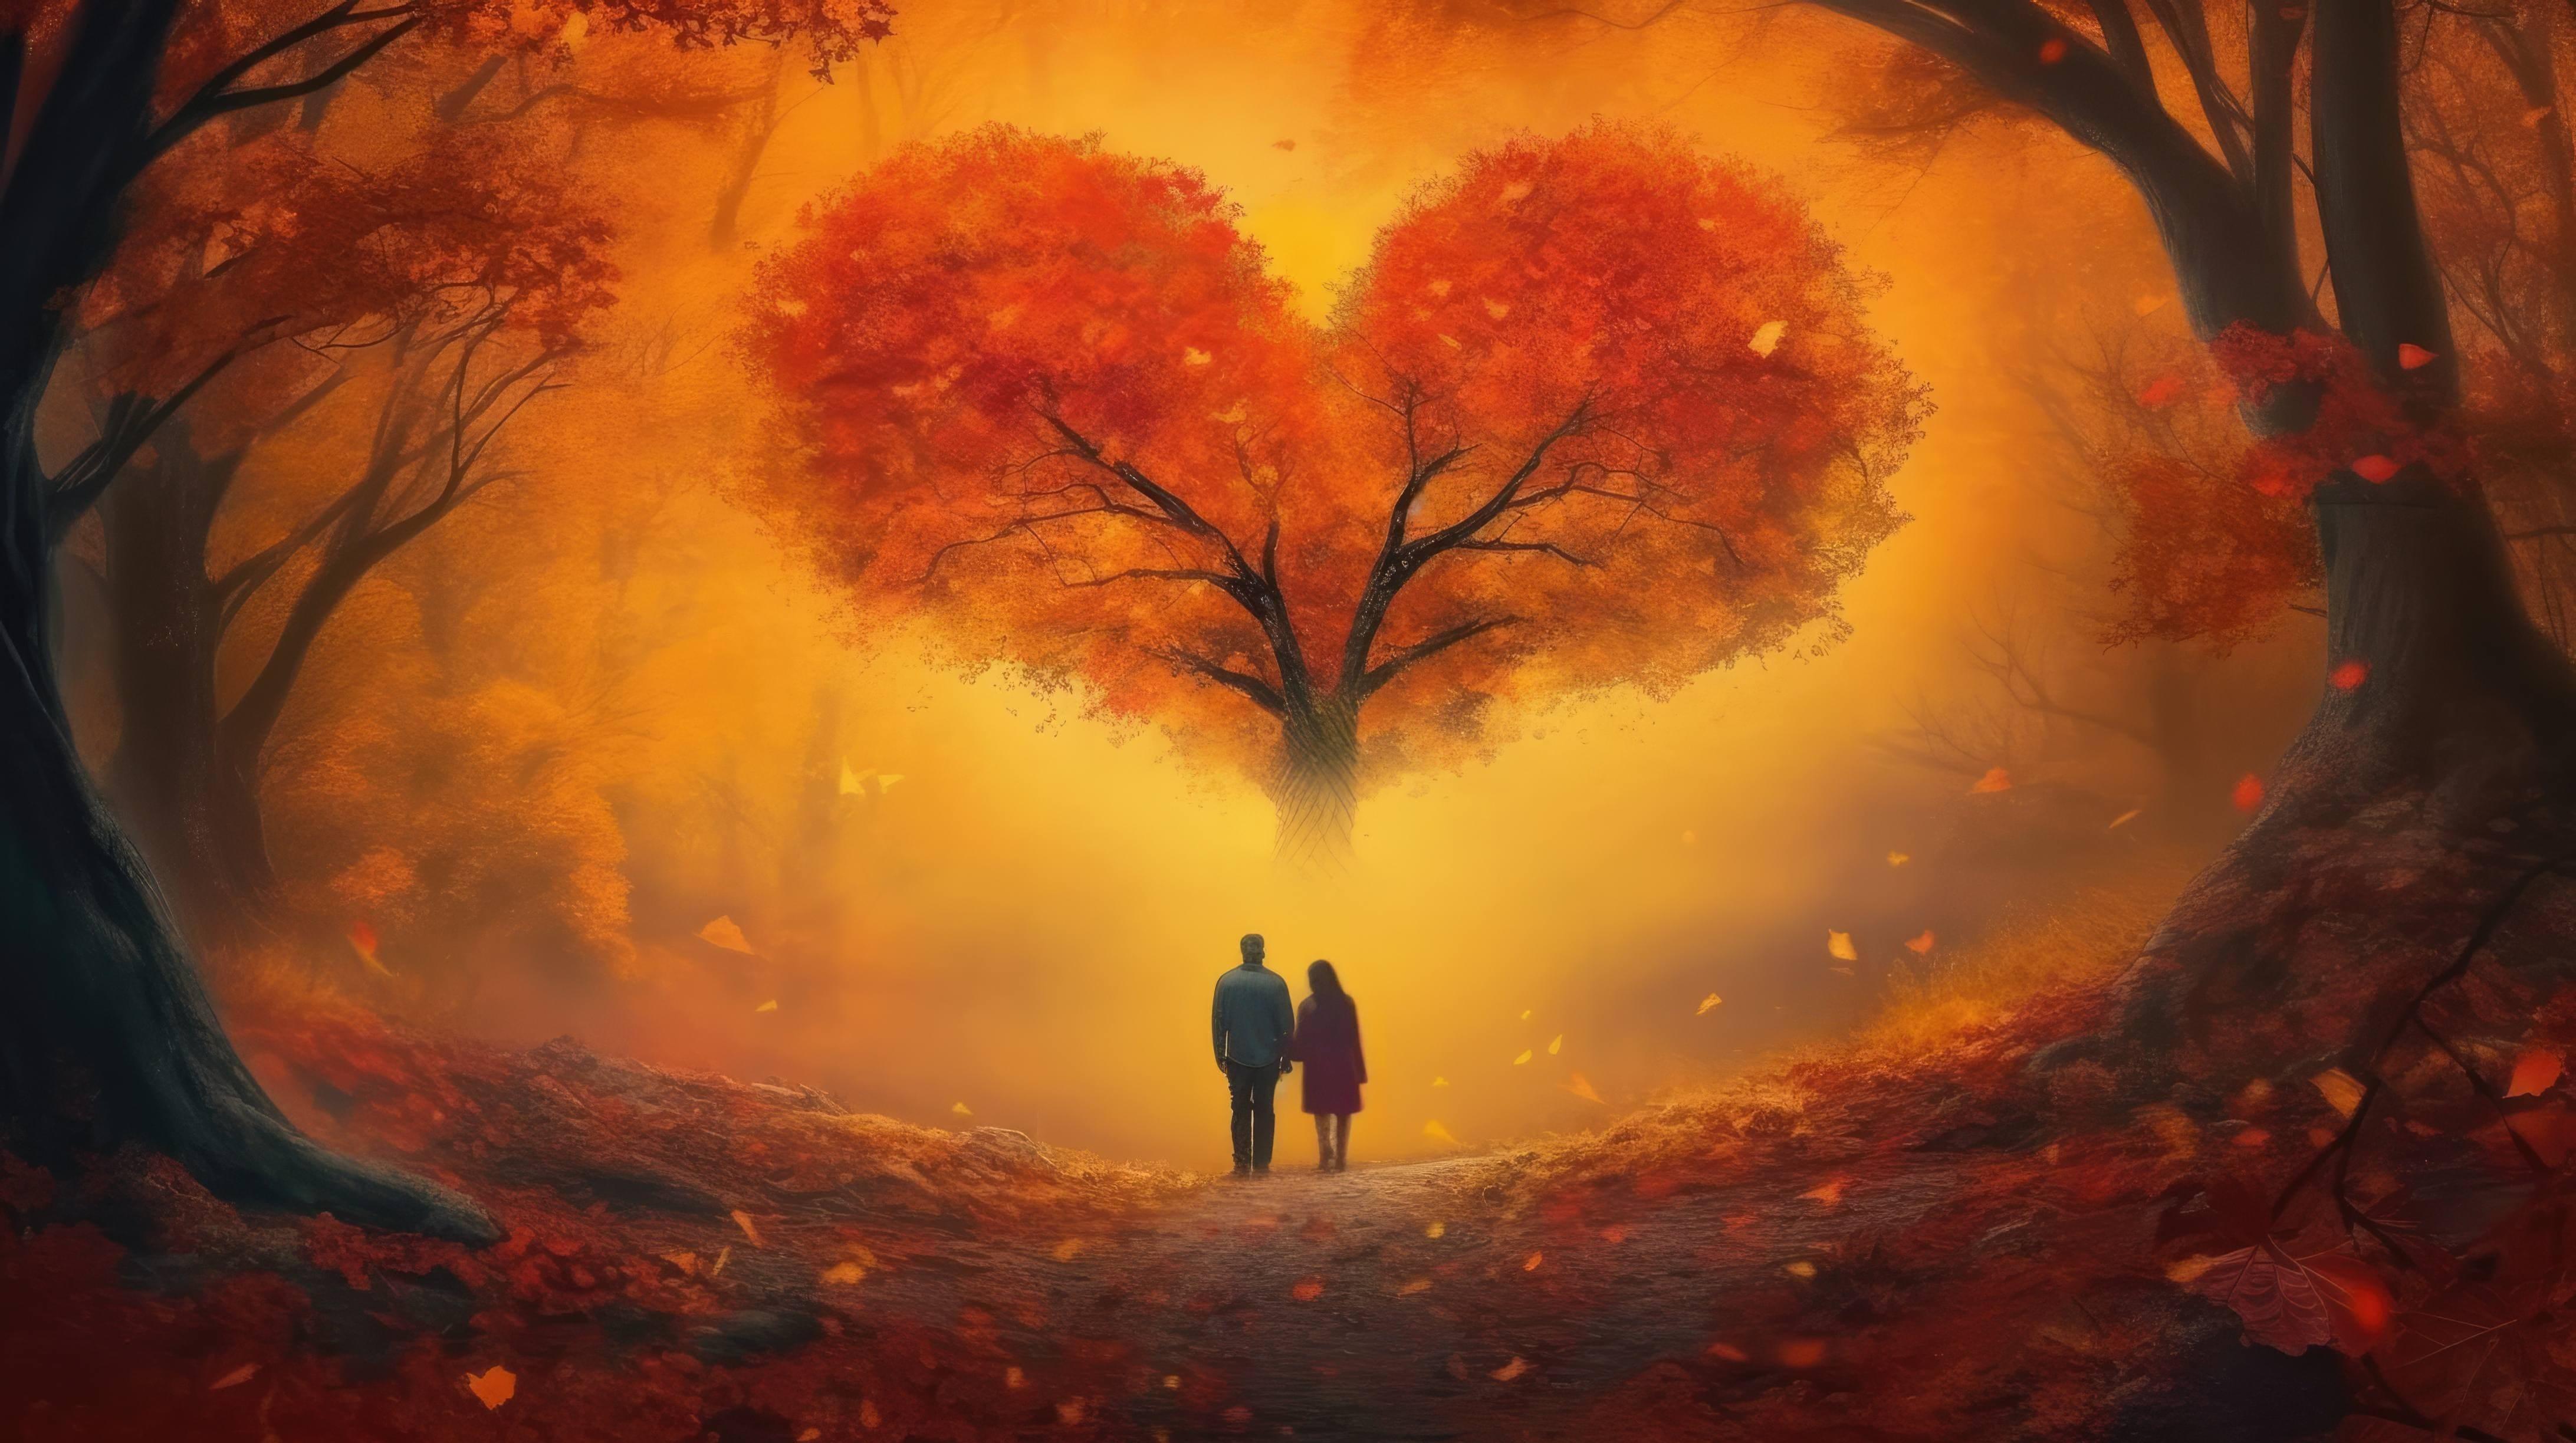 A 4K ultra hd wallpaper portraying a heart shaped tree with autumn